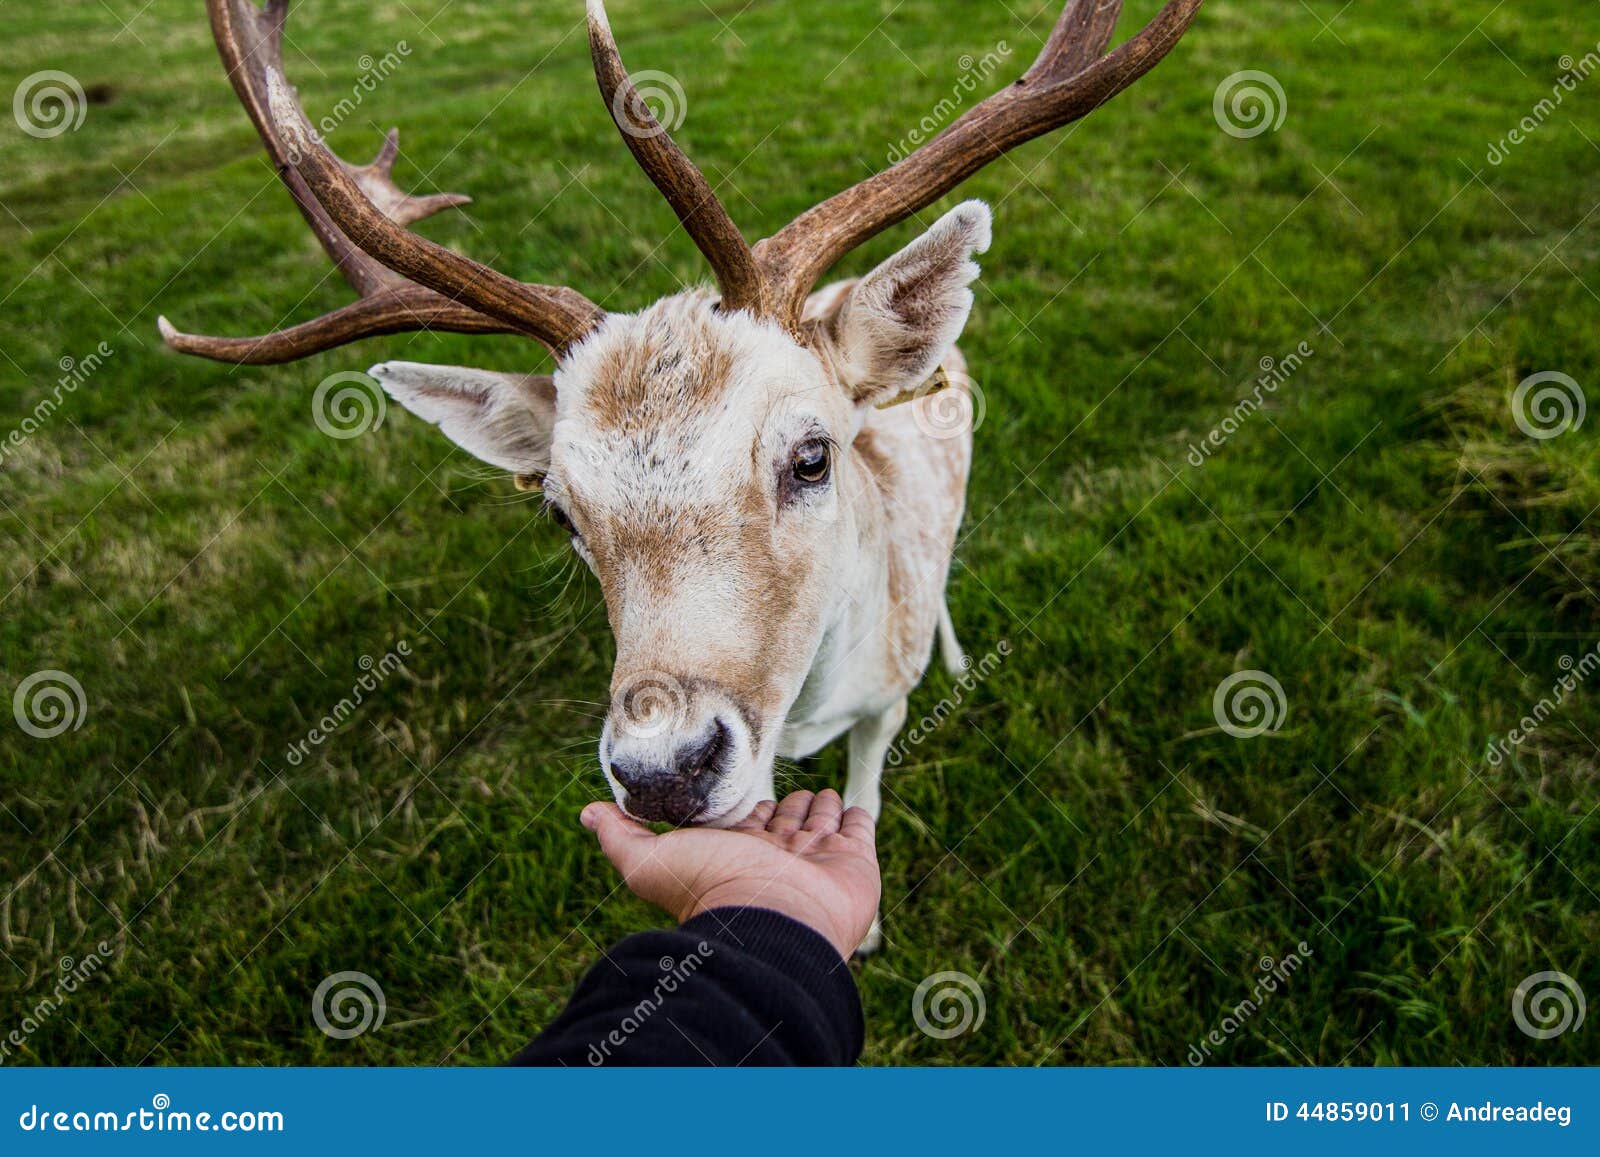 close encounter with a deer